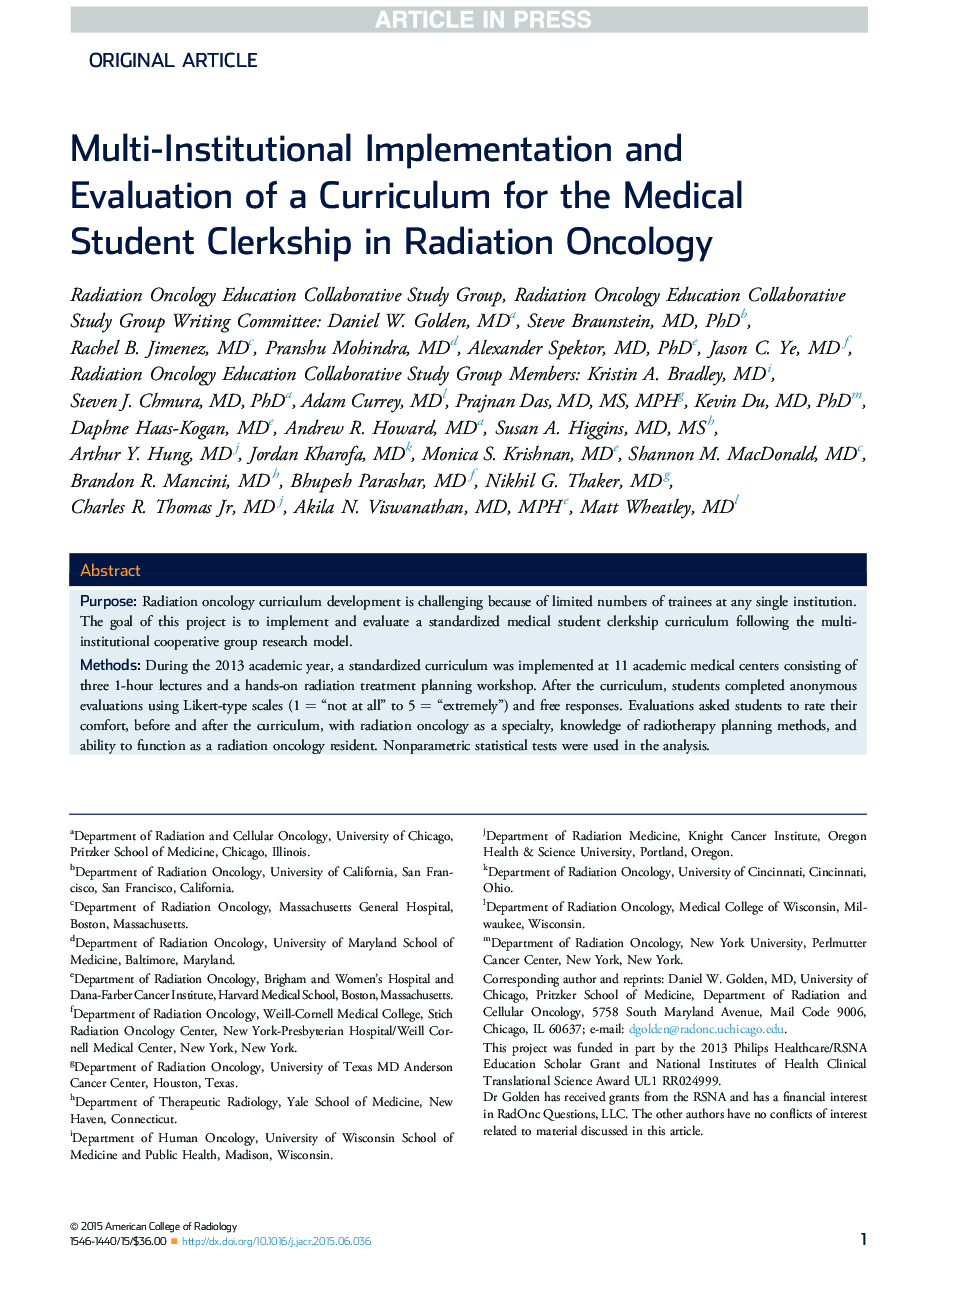 Multi-Institutional Implementation and Evaluation of a Curriculum for the Medical Student Clerkship in Radiation Oncology